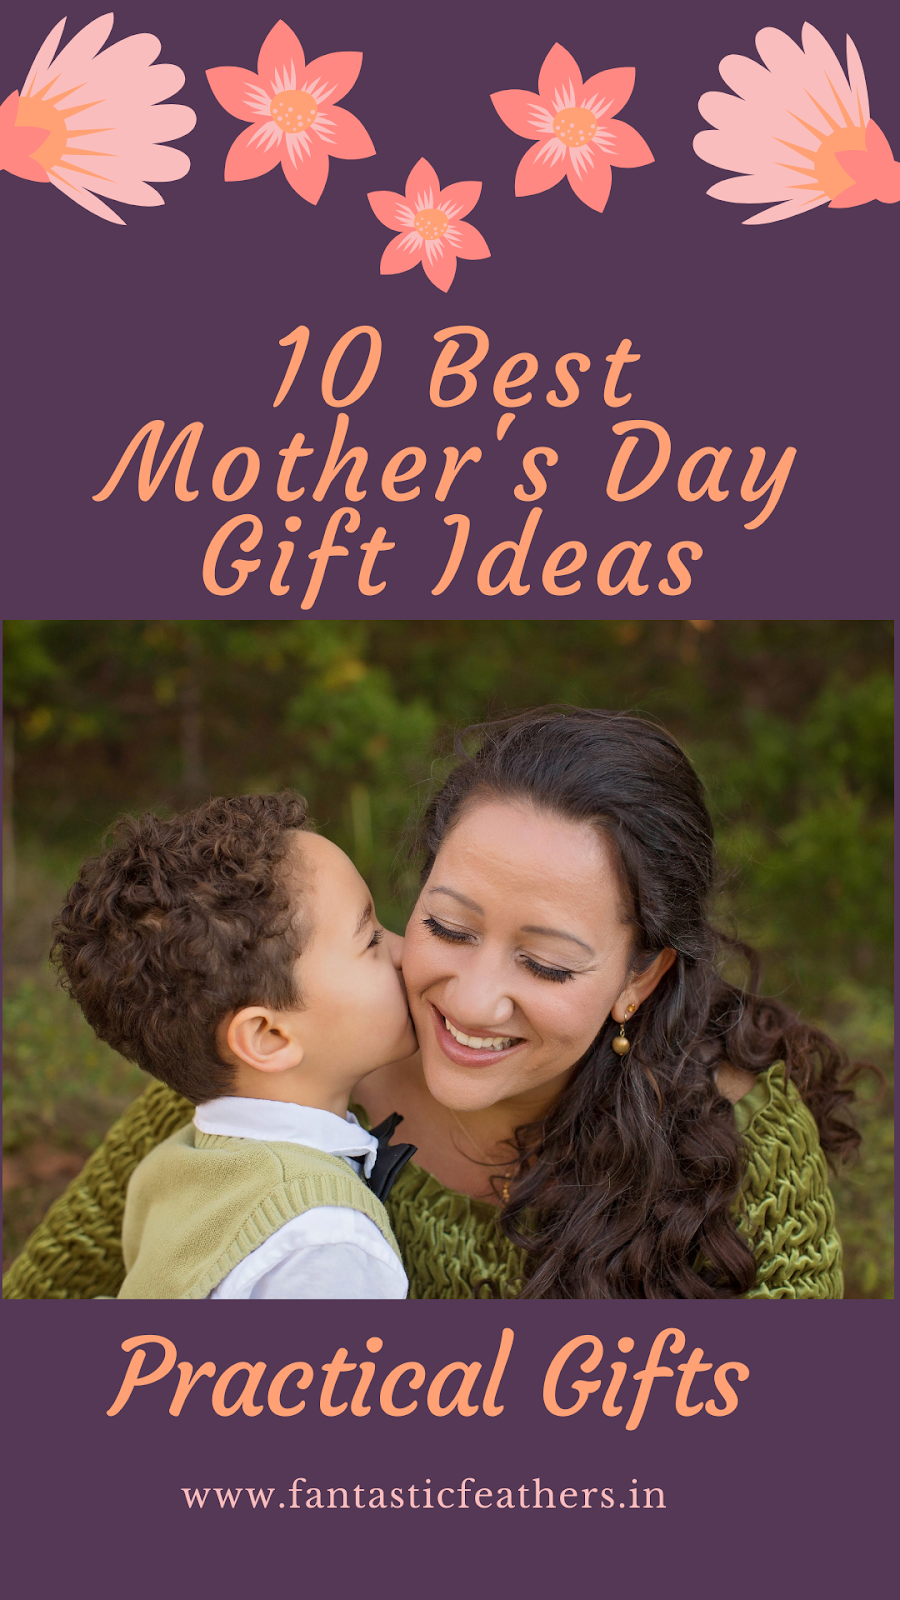 Fantastic Feathers: 10 best Mother's day gift Ideas